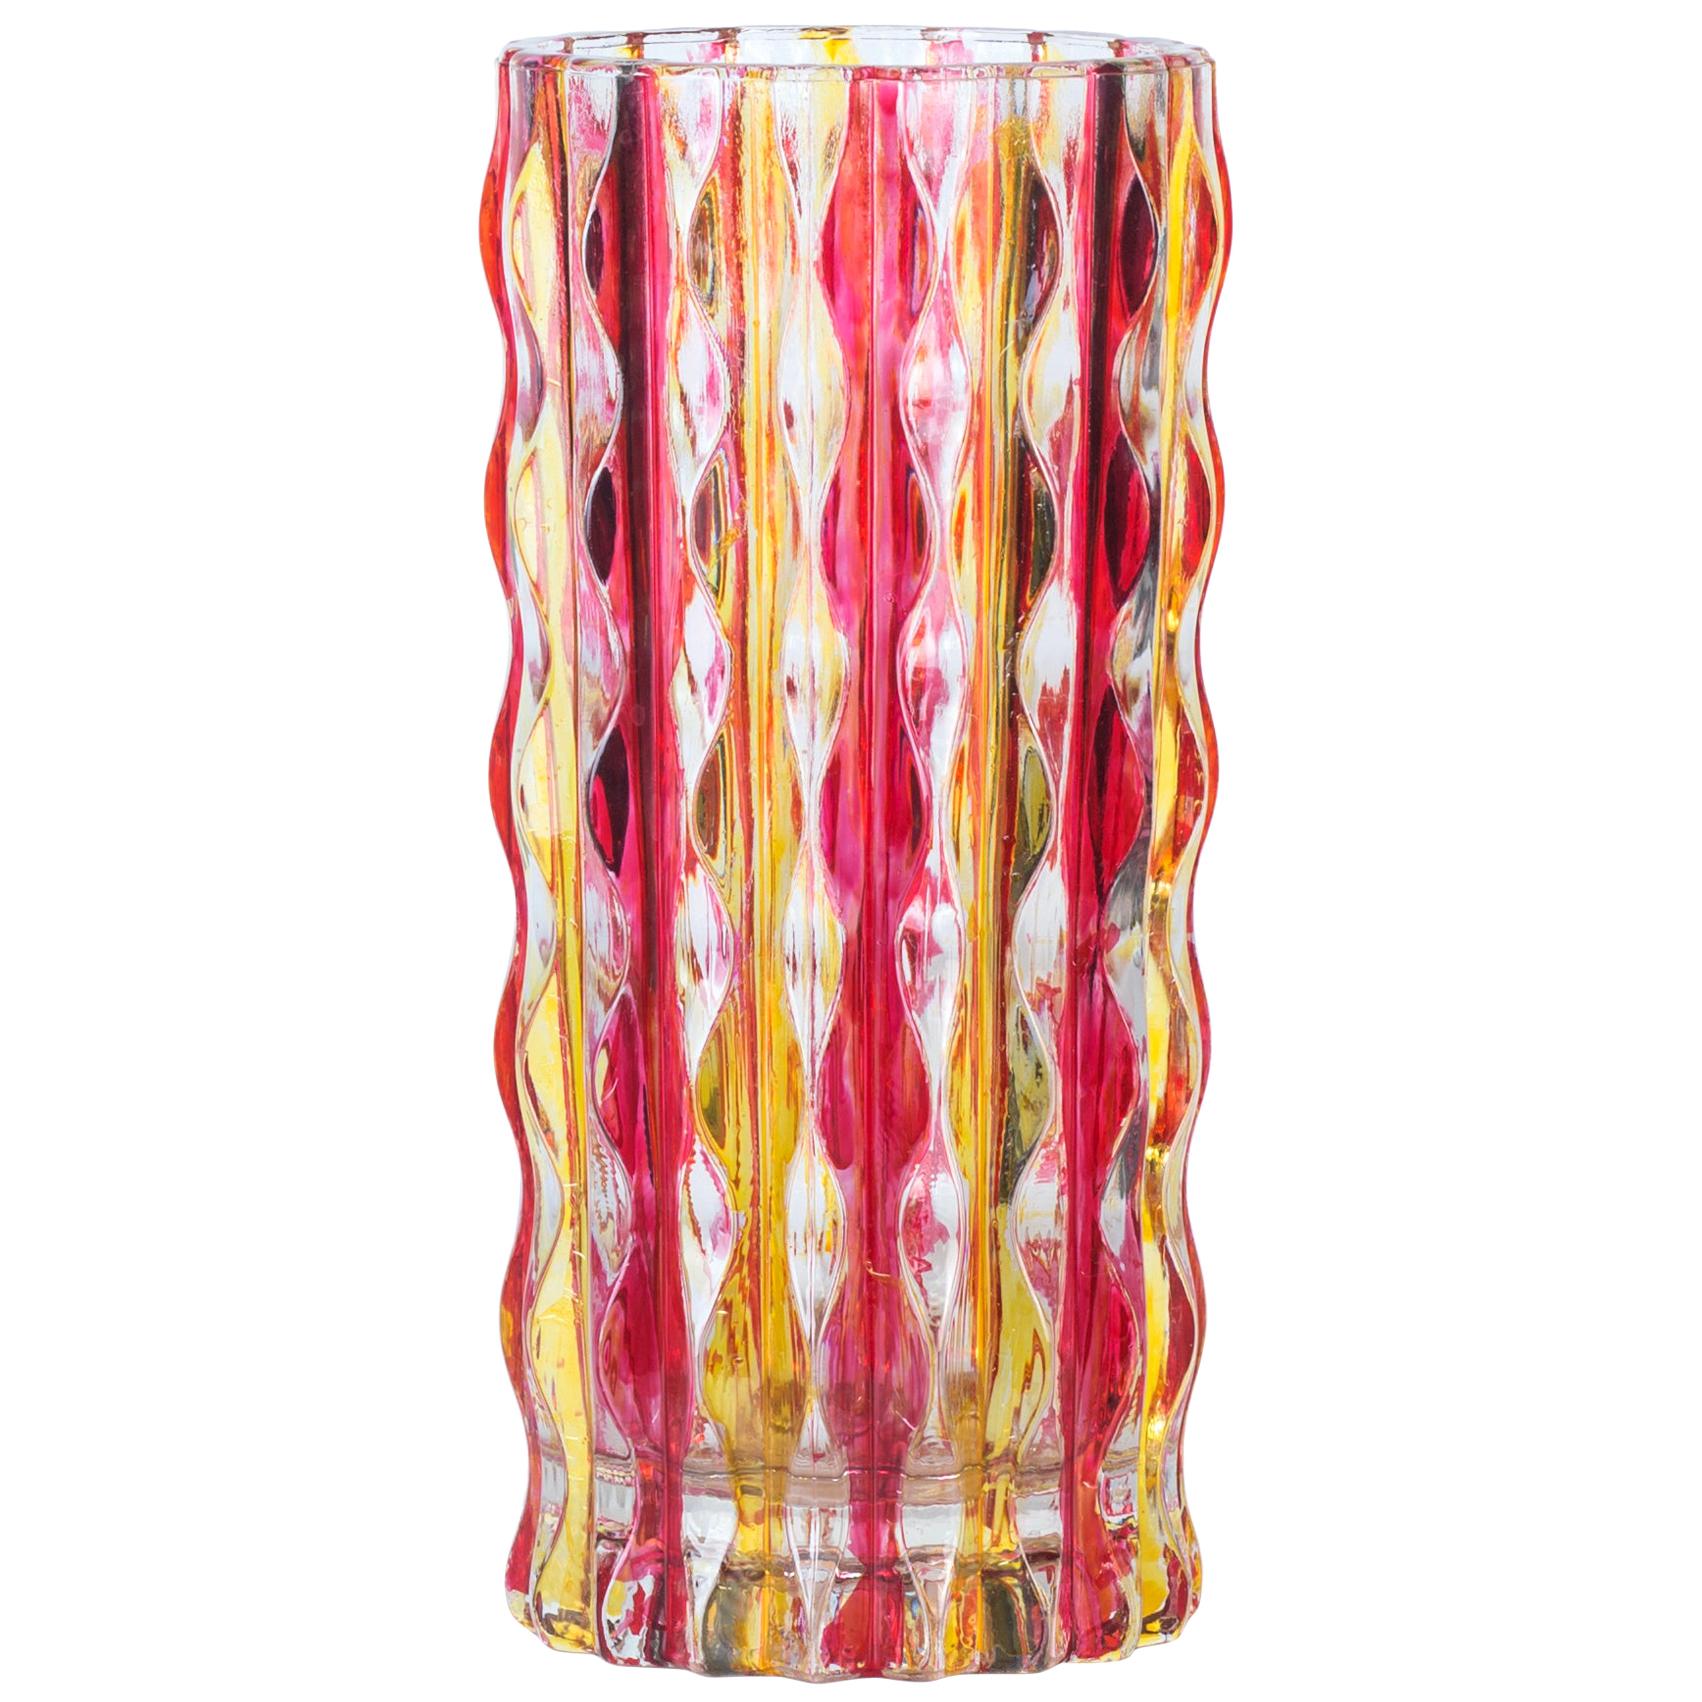 Pop glass vase is a beautiful glass decorative object, realized by an Italian manufacture during the 1970s. 

Very fashionable pink and yellow colored vase with multifaceted decorations in relief along the body.

Very good conditions.